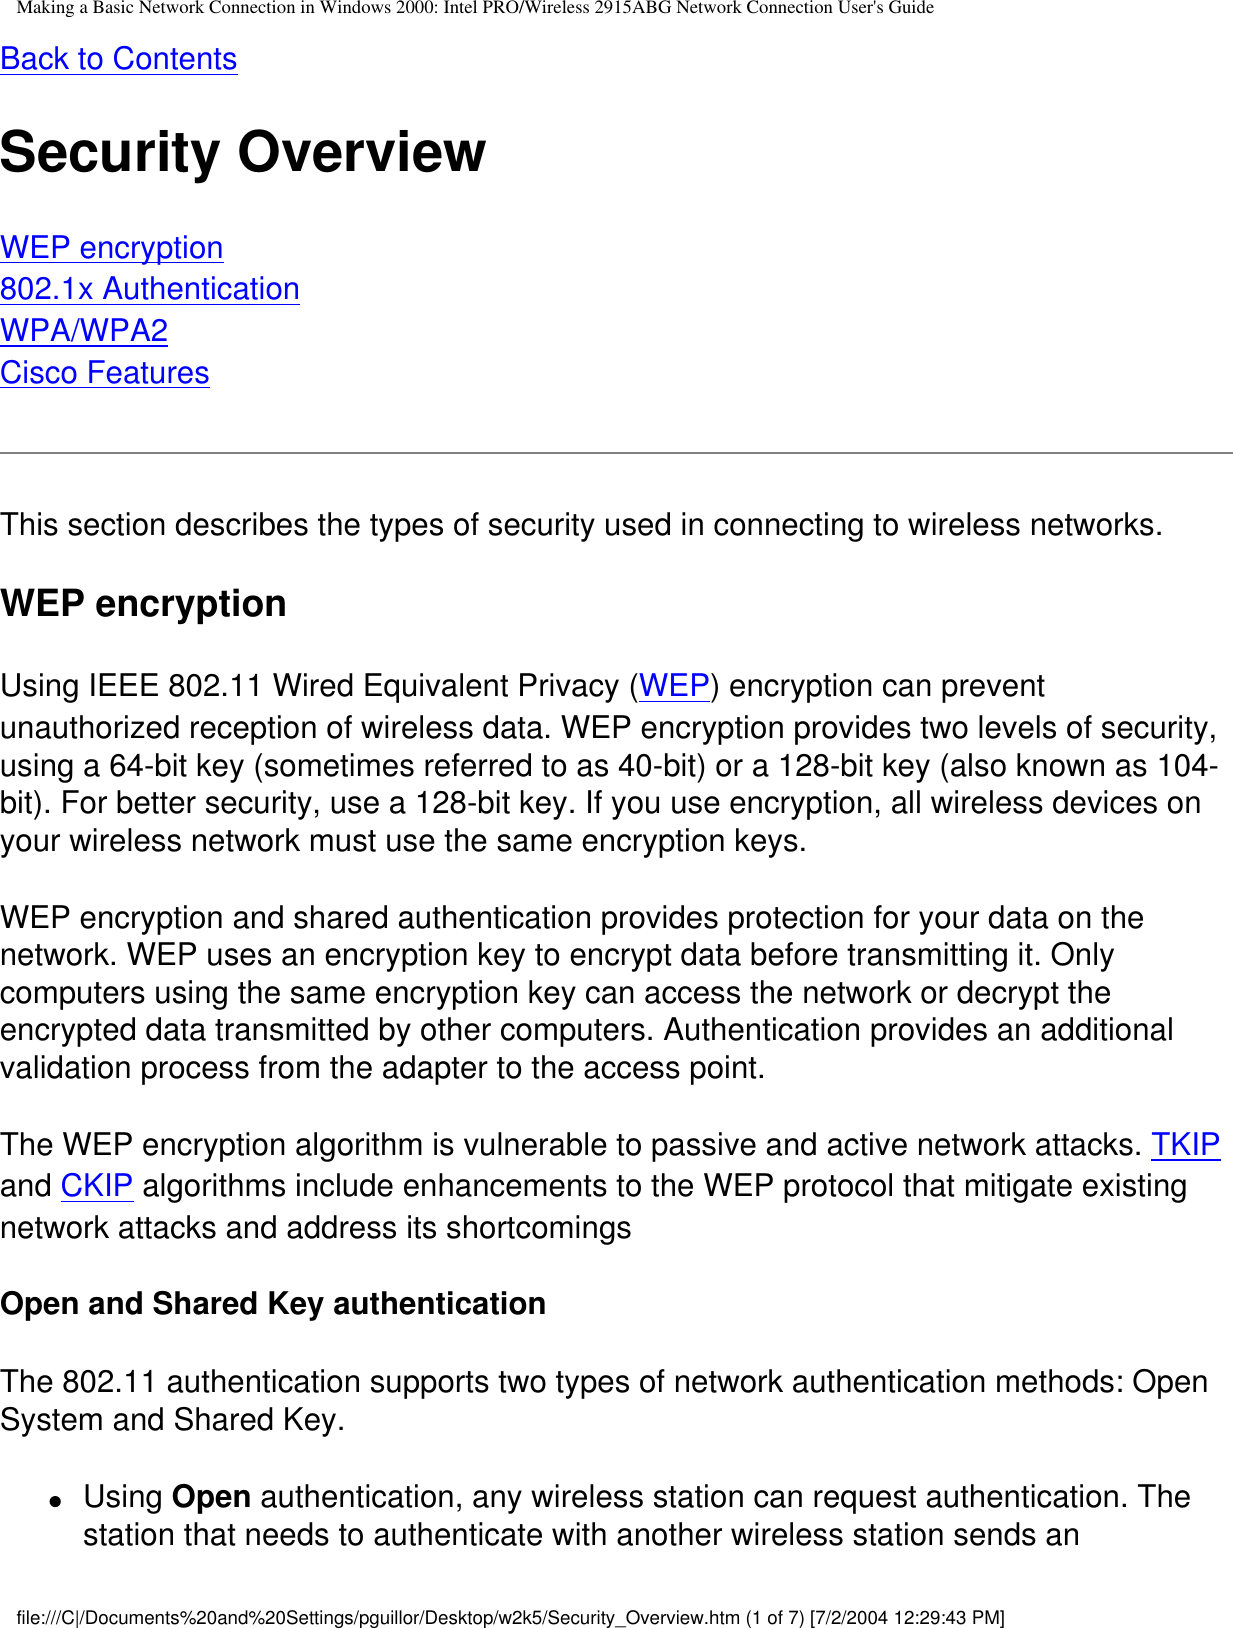 Making a Basic Network Connection in Windows 2000: Intel PRO/Wireless 2915ABG Network Connection User&apos;s GuideBack to ContentsSecurity OverviewWEP encryption802.1x AuthenticationWPA/WPA2Cisco Features This section describes the types of security used in connecting to wireless networks.WEP encryptionUsing IEEE 802.11 Wired Equivalent Privacy (WEP) encryption can prevent unauthorized reception of wireless data. WEP encryption provides two levels of security, using a 64-bit key (sometimes referred to as 40-bit) or a 128-bit key (also known as 104-bit). For better security, use a 128-bit key. If you use encryption, all wireless devices on your wireless network must use the same encryption keys.WEP encryption and shared authentication provides protection for your data on the network. WEP uses an encryption key to encrypt data before transmitting it. Only computers using the same encryption key can access the network or decrypt the encrypted data transmitted by other computers. Authentication provides an additional validation process from the adapter to the access point.The WEP encryption algorithm is vulnerable to passive and active network attacks. TKIP and CKIP algorithms include enhancements to the WEP protocol that mitigate existing network attacks and address its shortcomingsOpen and Shared Key authenticationThe 802.11 authentication supports two types of network authentication methods: Open System and Shared Key.●     Using Open authentication, any wireless station can request authentication. The station that needs to authenticate with another wireless station sends an file:///C|/Documents%20and%20Settings/pguillor/Desktop/w2k5/Security_Overview.htm (1 of 7) [7/2/2004 12:29:43 PM]